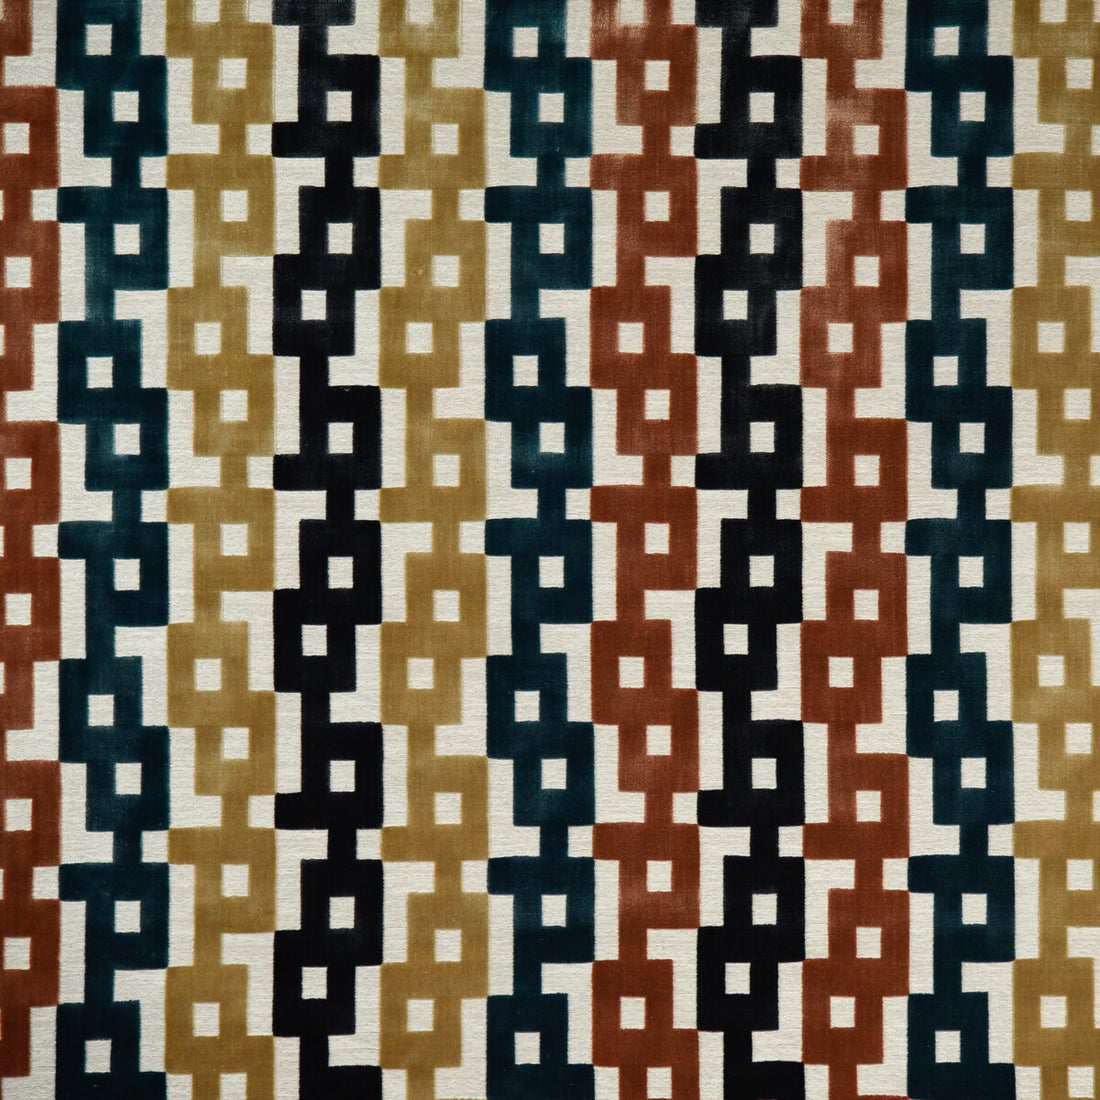 Chain Velvet fabric in clay/teal color - pattern 35856.524.0 - by Kravet Couture